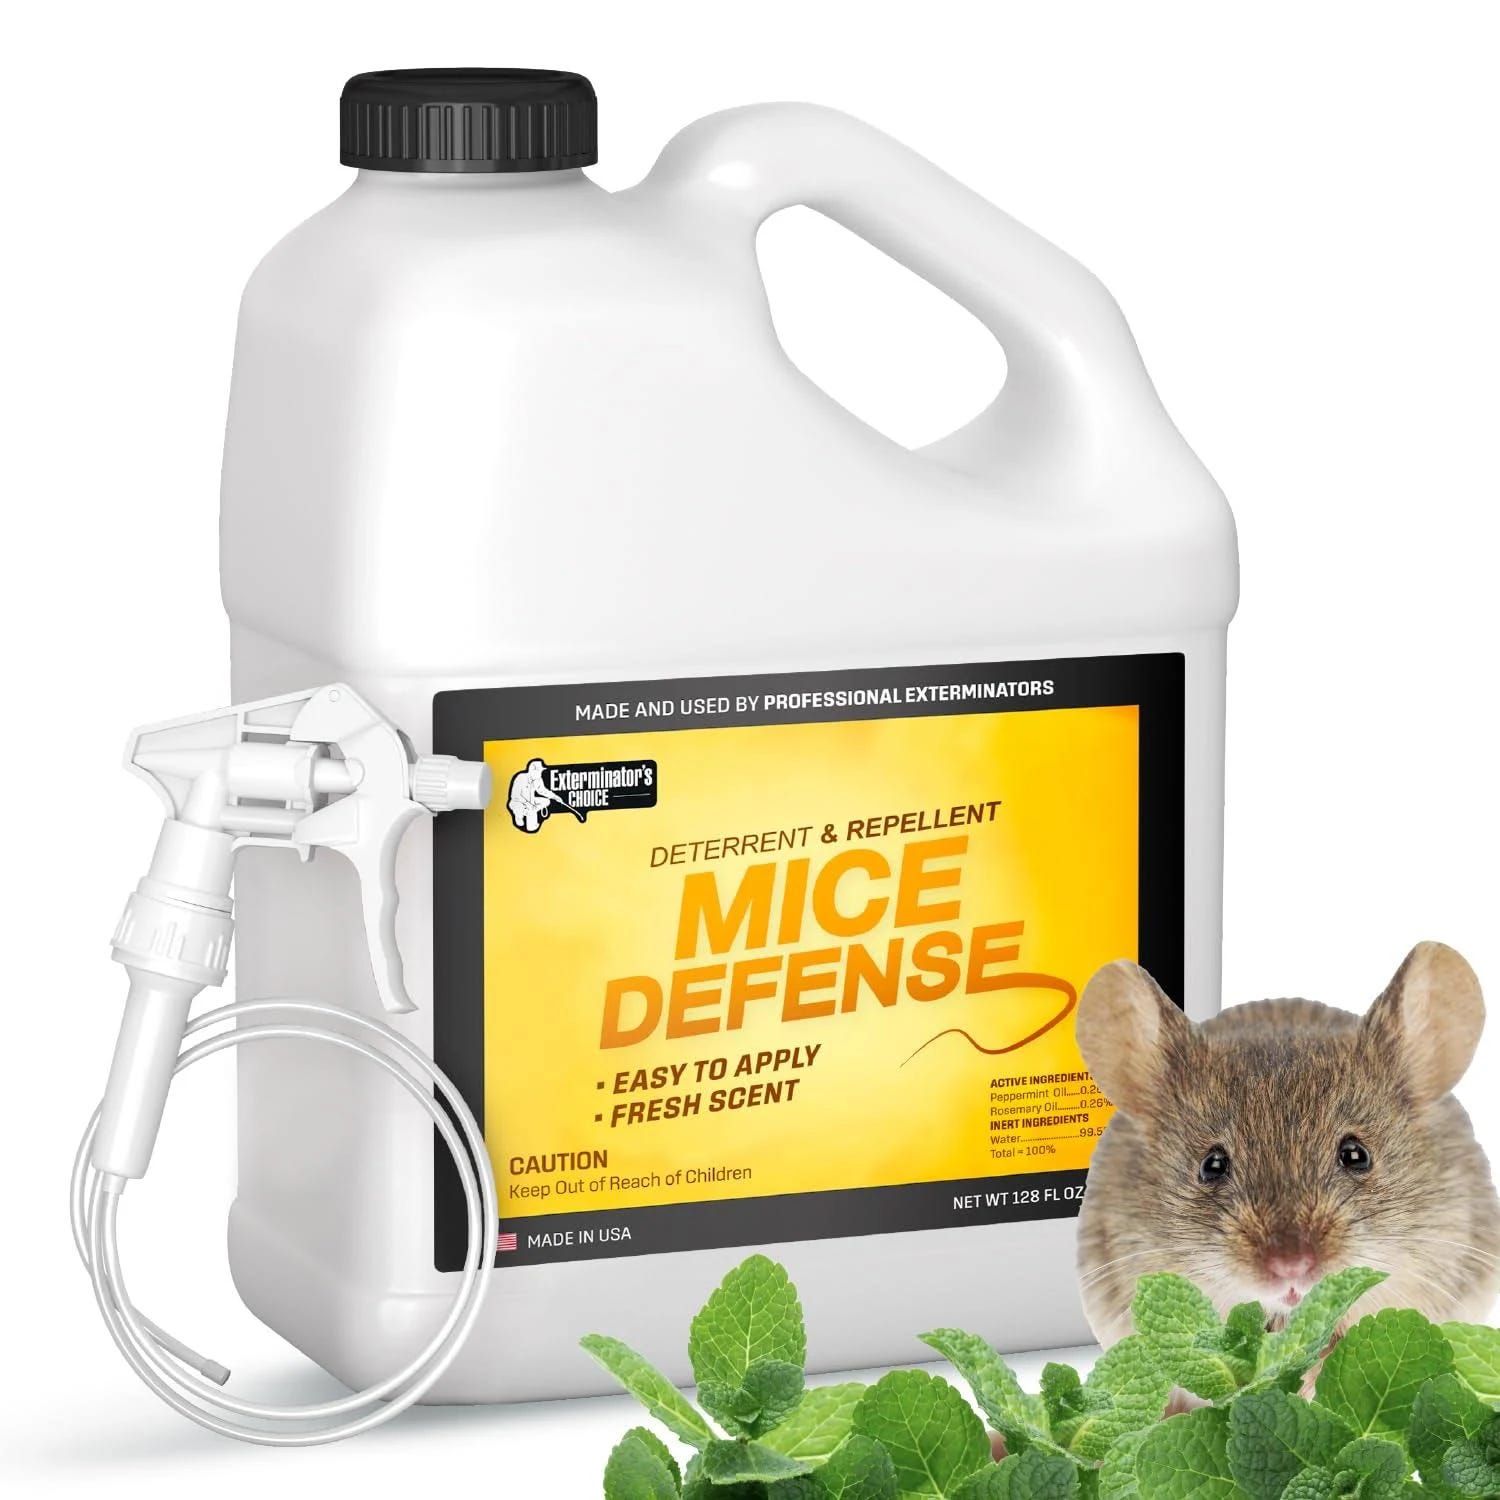 Exterminators Choice Mice Defense - Effective All-Natural Rodent Repellent Spray | Image